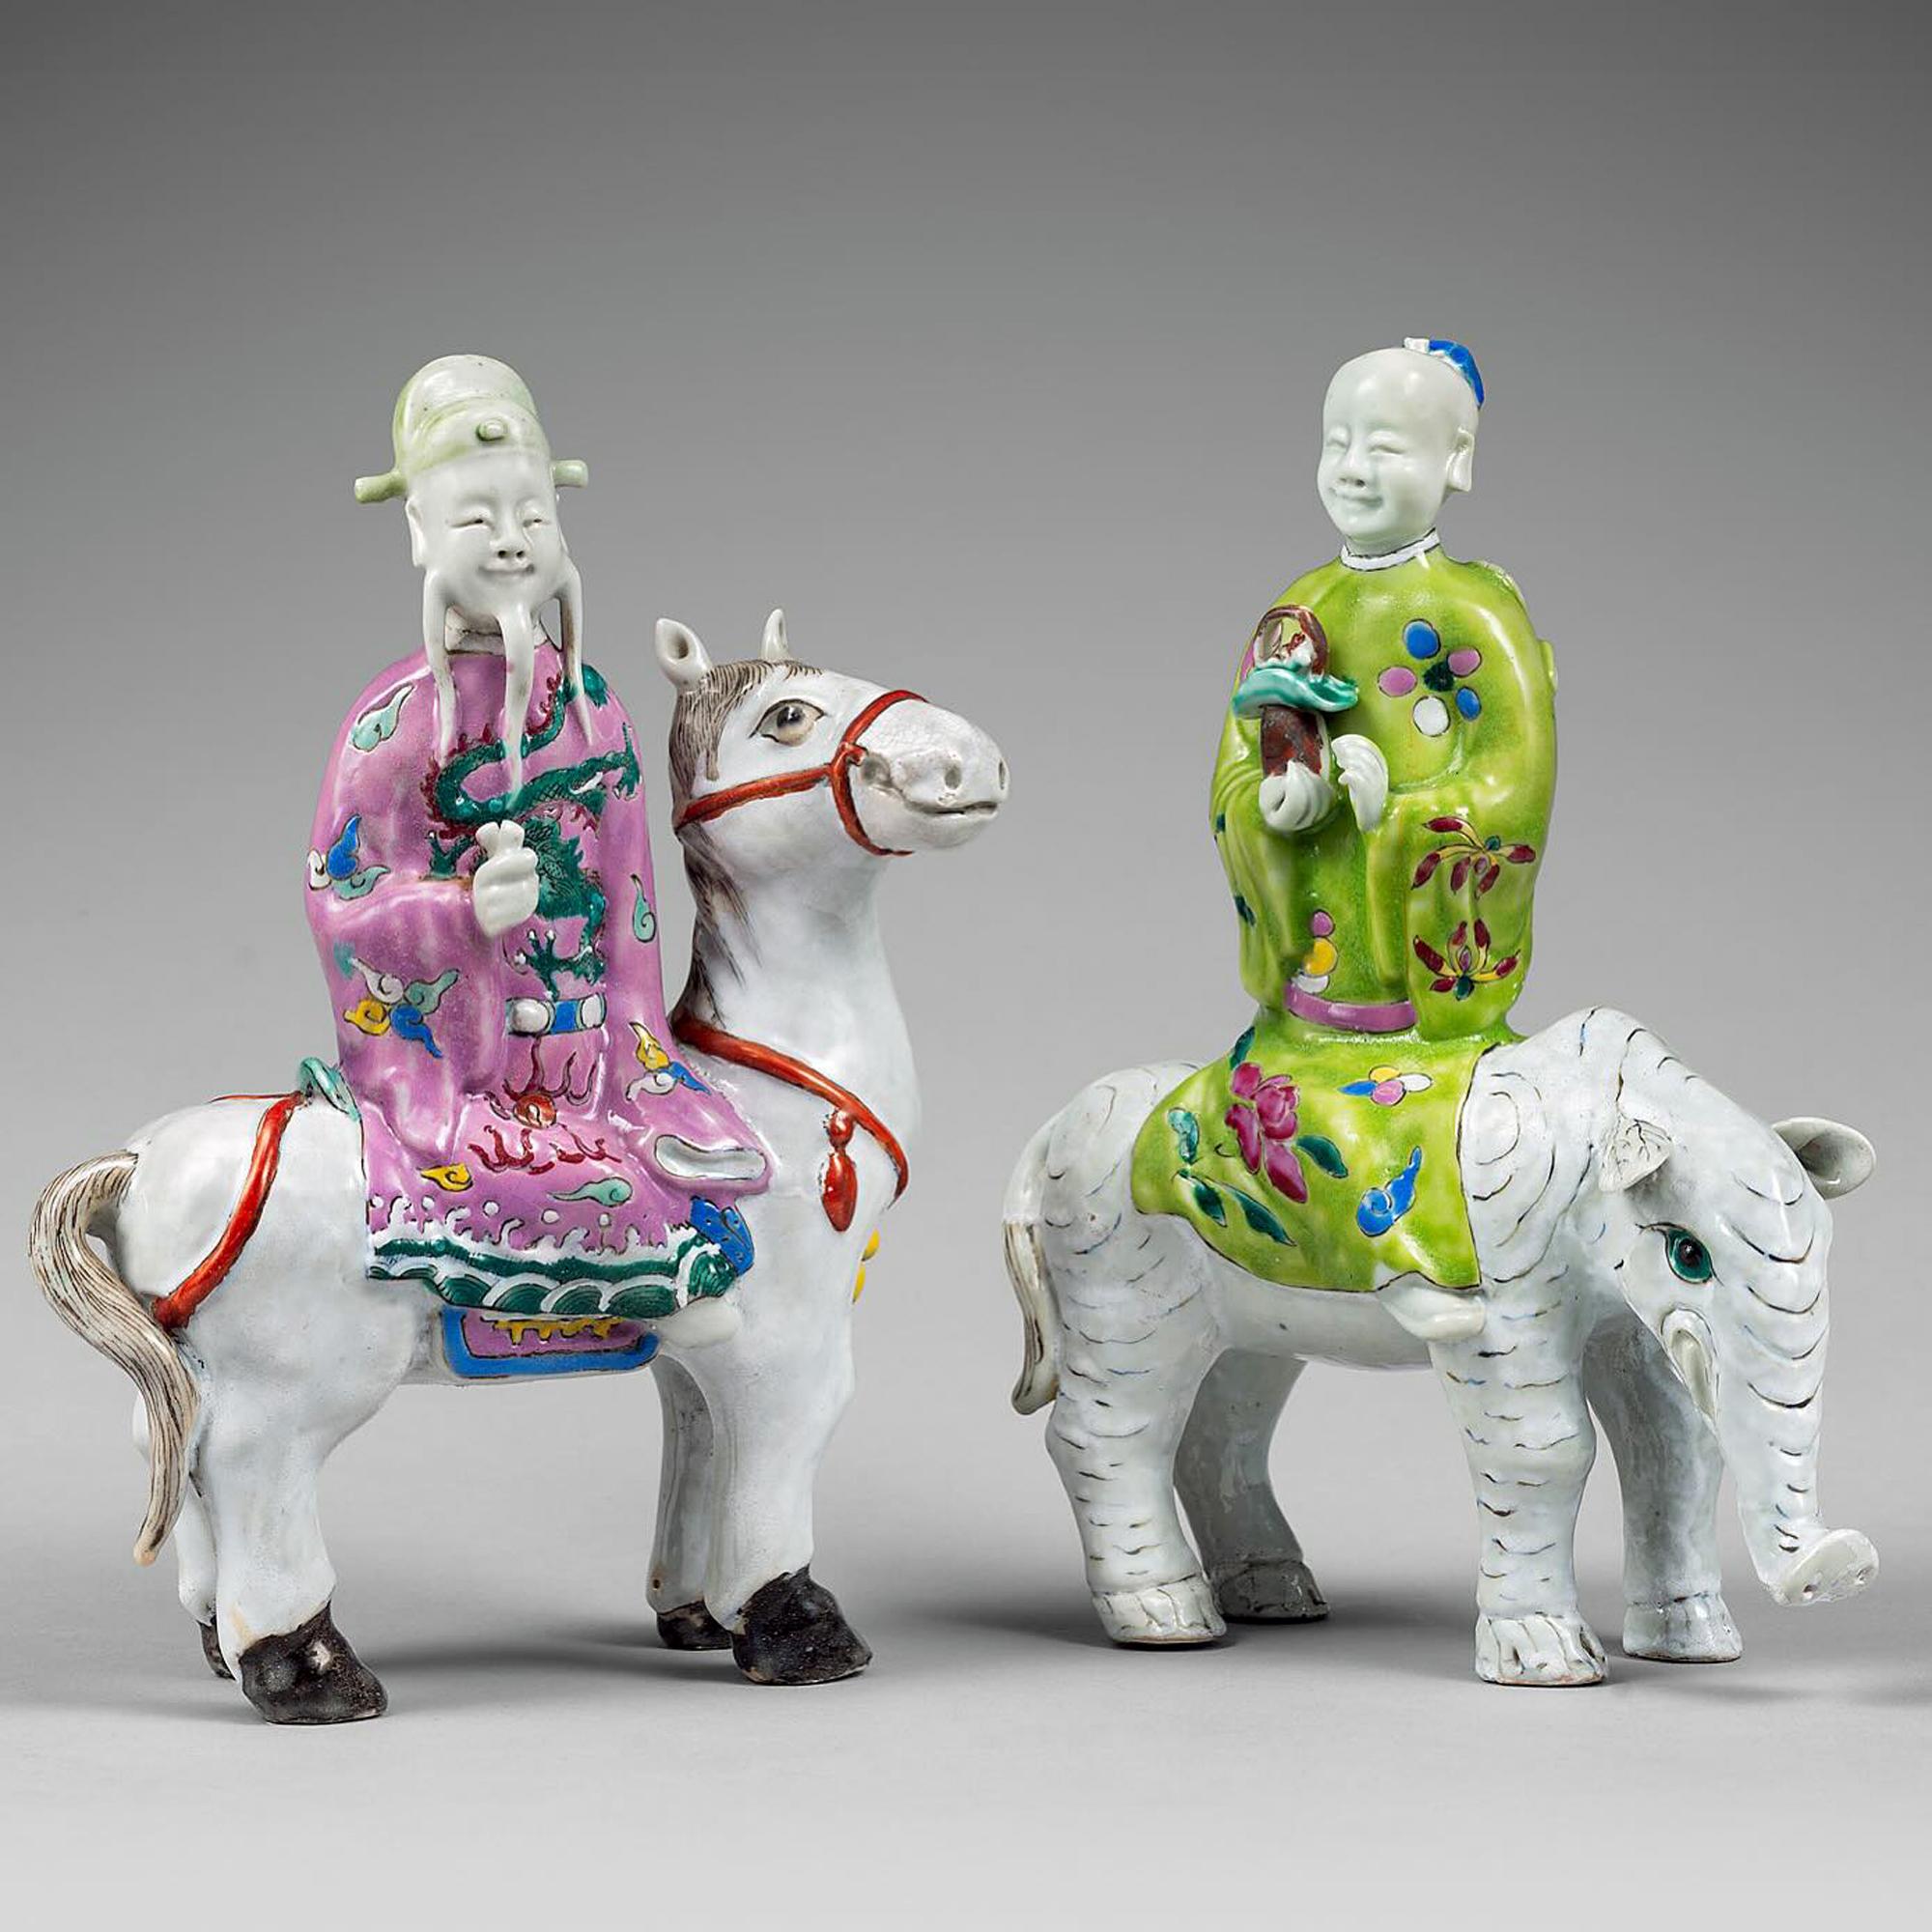 Chinese Export Porcelain Immortal Figures Mounted on the Back of Animals,
Circa 1780

The rare Chinese Export porcelain figures depict two immortals riding on the backs of a mythical elephant and a horse. Cao Guojiu with castanets on a white horse,